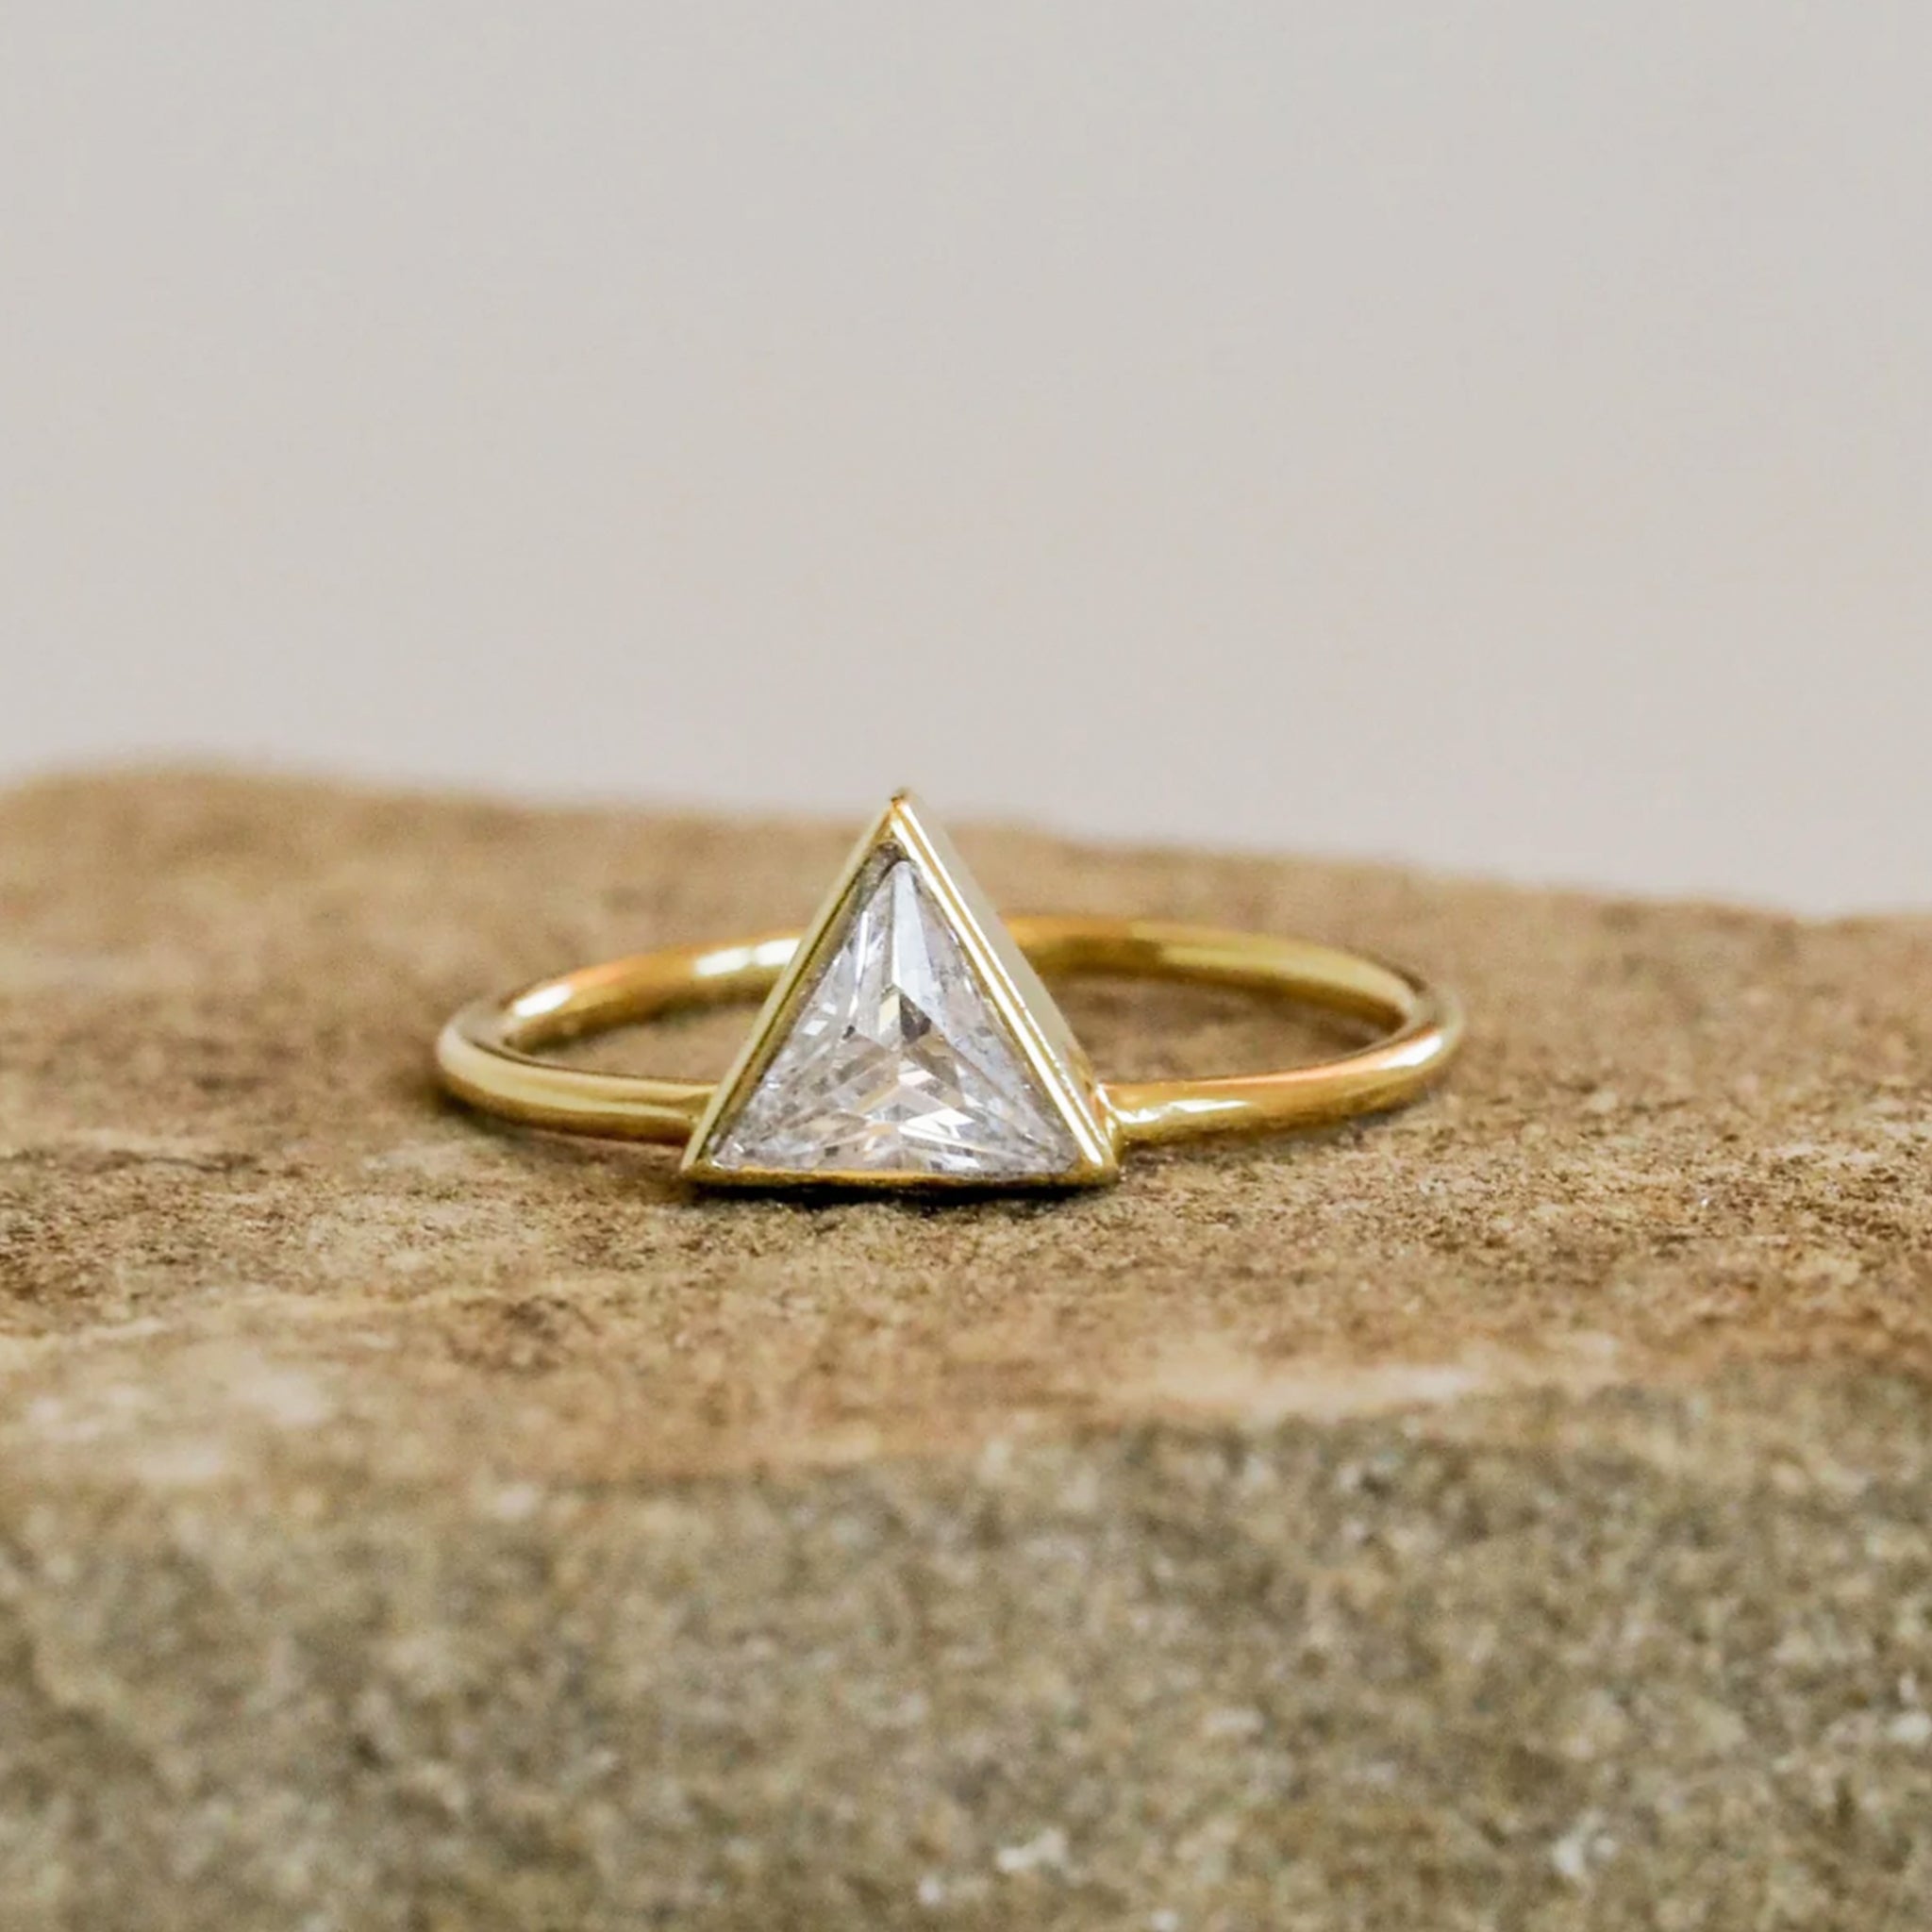 A gold ring with a triangle CZ stone in the center. 